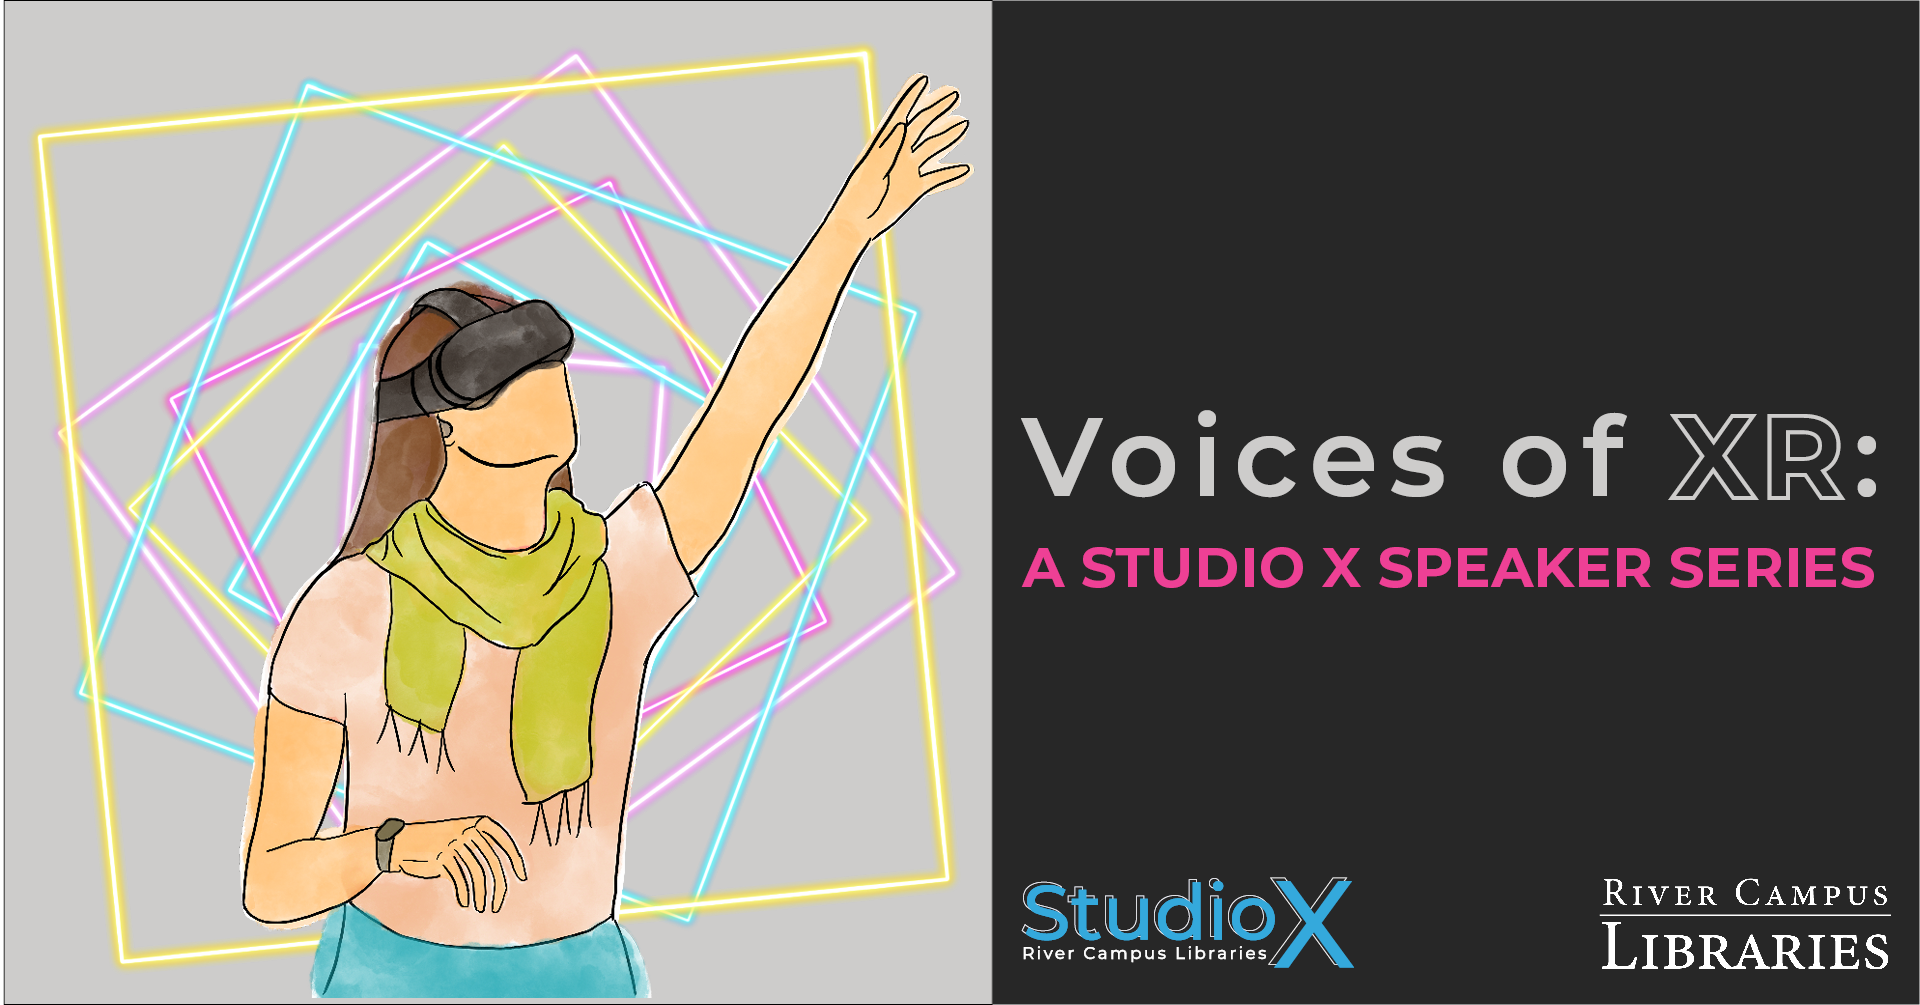 banner for XR speaker series entitled Voices of XR. On the left, an illustration of a person in a headset reaching with neon geometric squares in the background. On the right is text that reads: "Voices of XR: A Studio X Speaker Series." Underneath, is the Studio X and River Campus Libraries wordmarks.